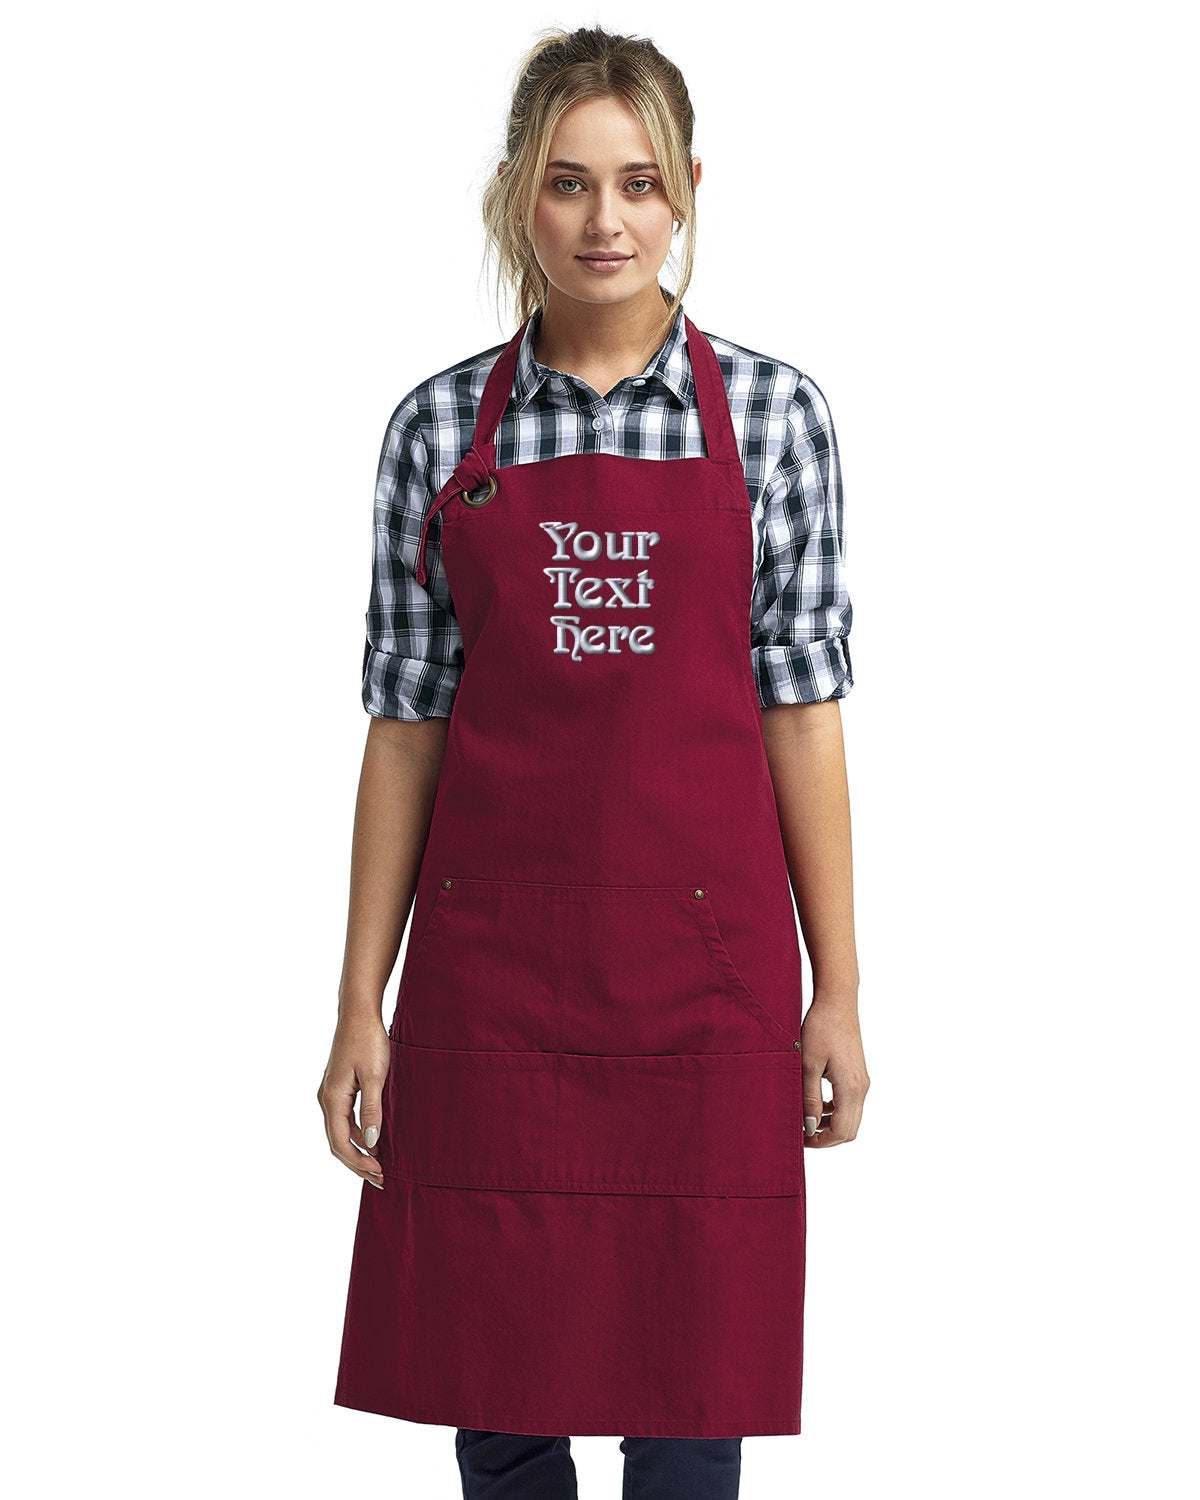 Unisex Pocket Apron Your Personalized Text Embroidered - 3 pack- burgundy